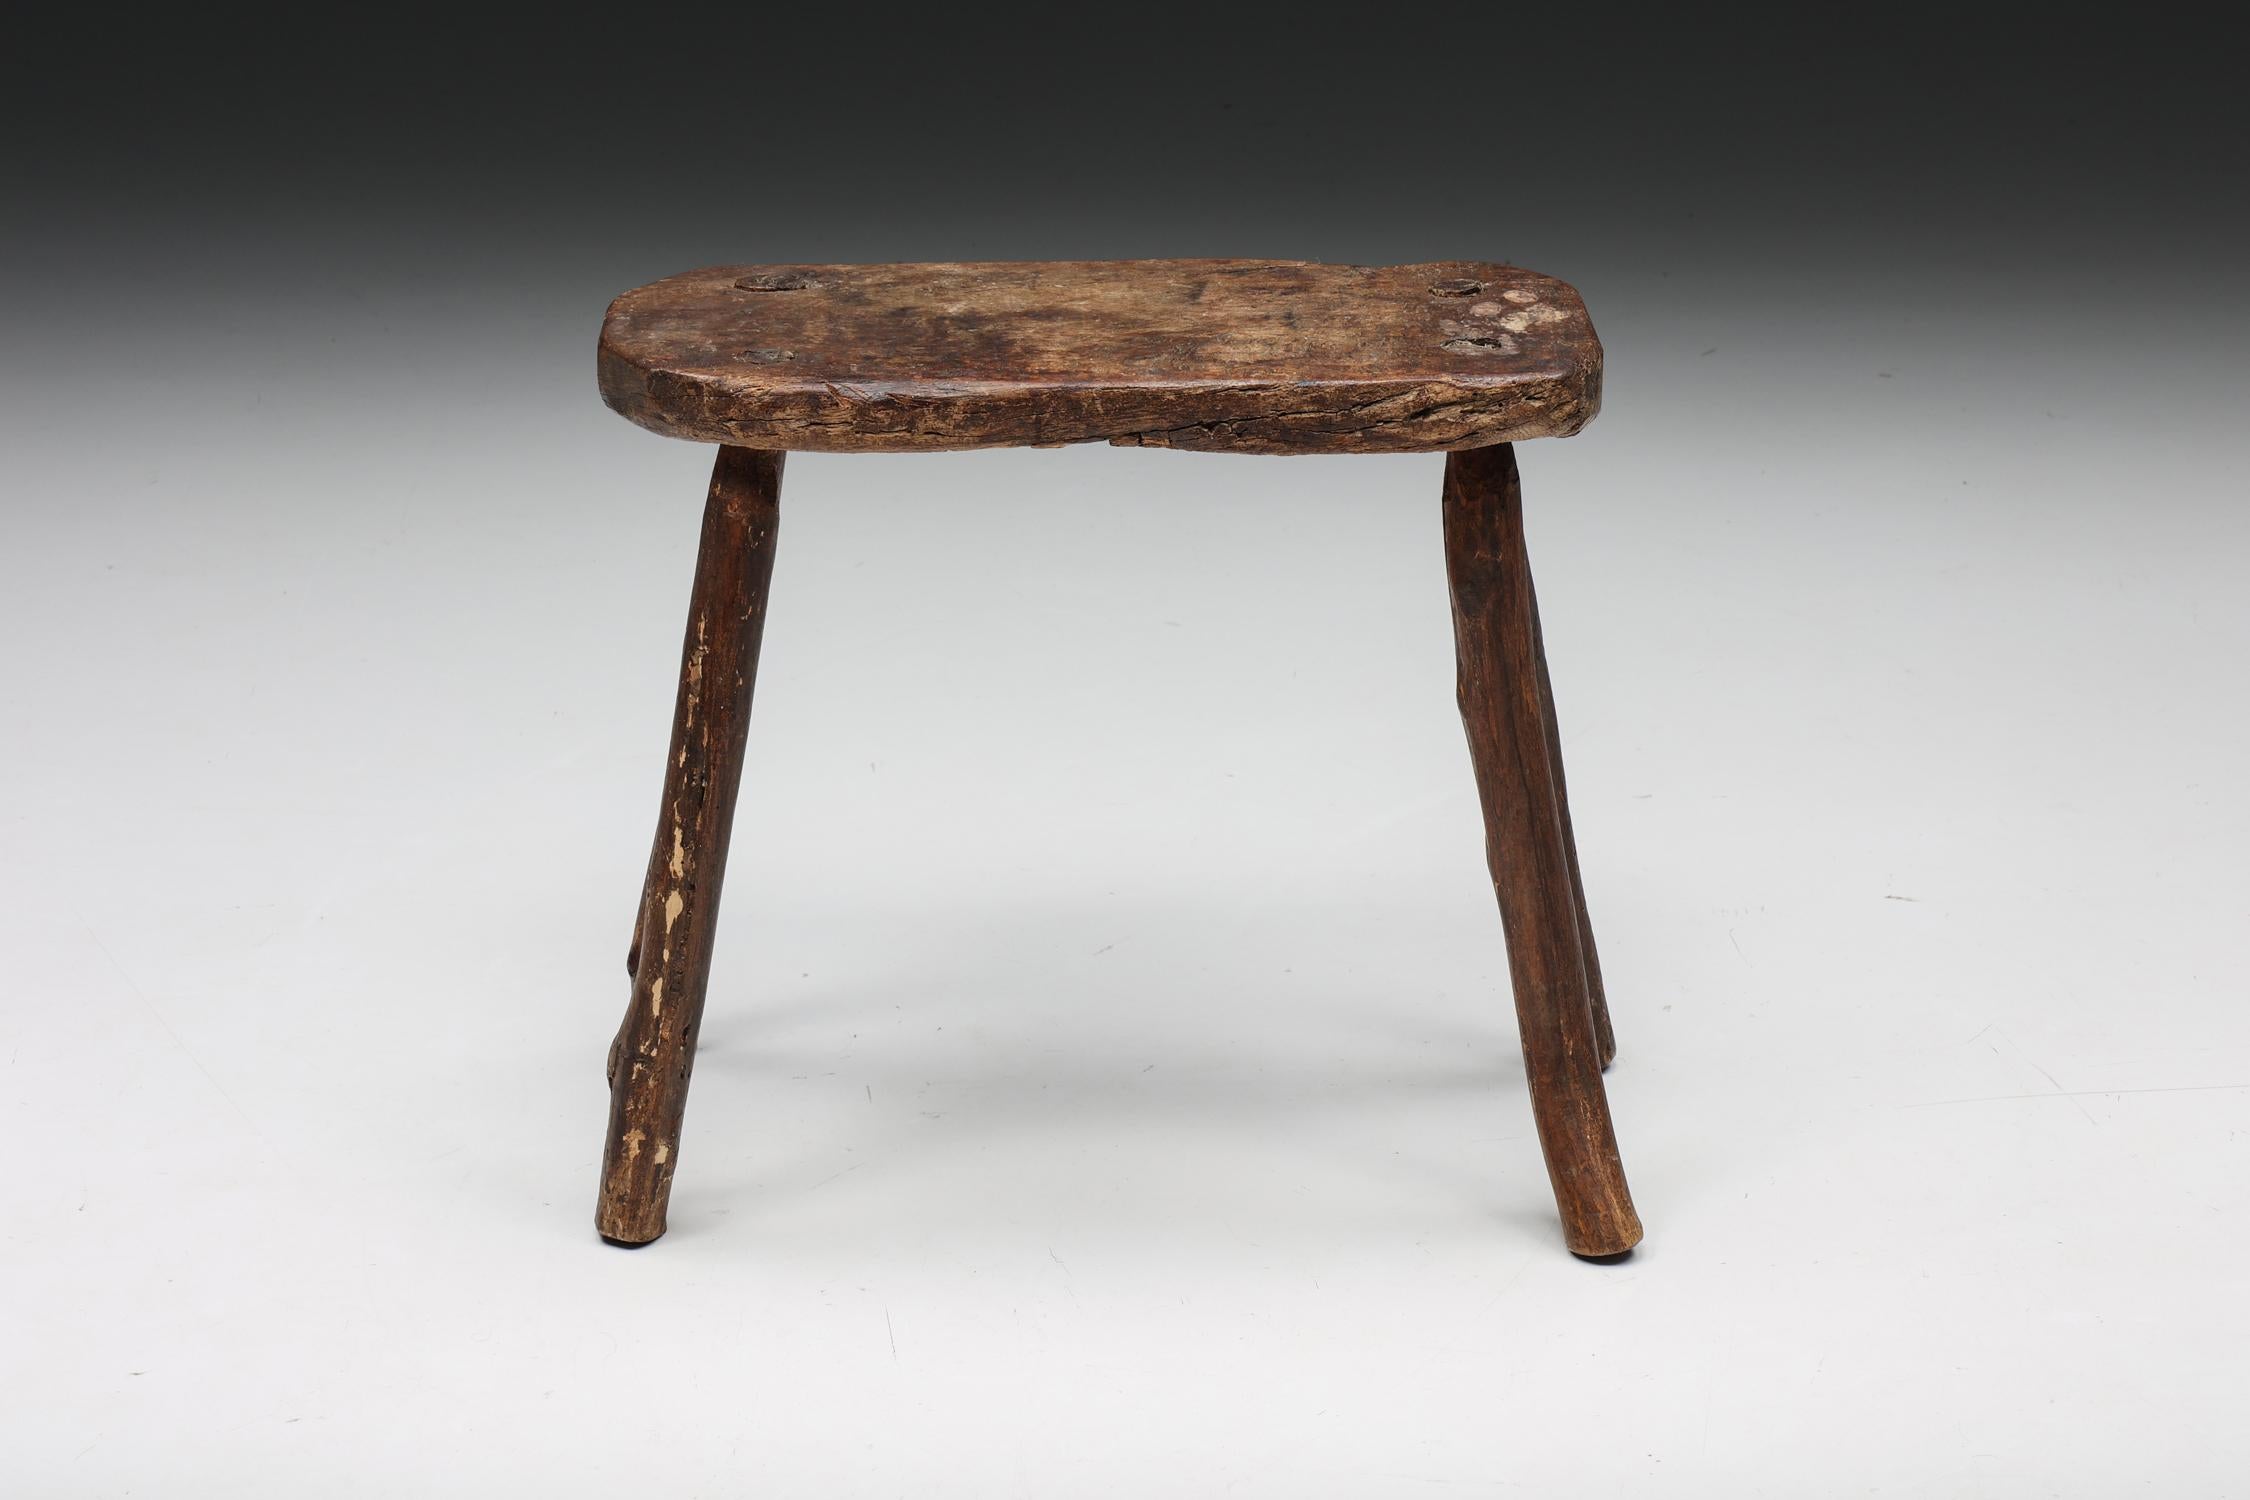 Rustic; Wabi Sabi; Stool; Four-Legged; France; 1940s;

Rustic wabi-sabi wooden stool with a four-legged base and an oval-shaped seat. With its remarkable patina, the design reminds us of the wabi-sabi philosophy which centres around the